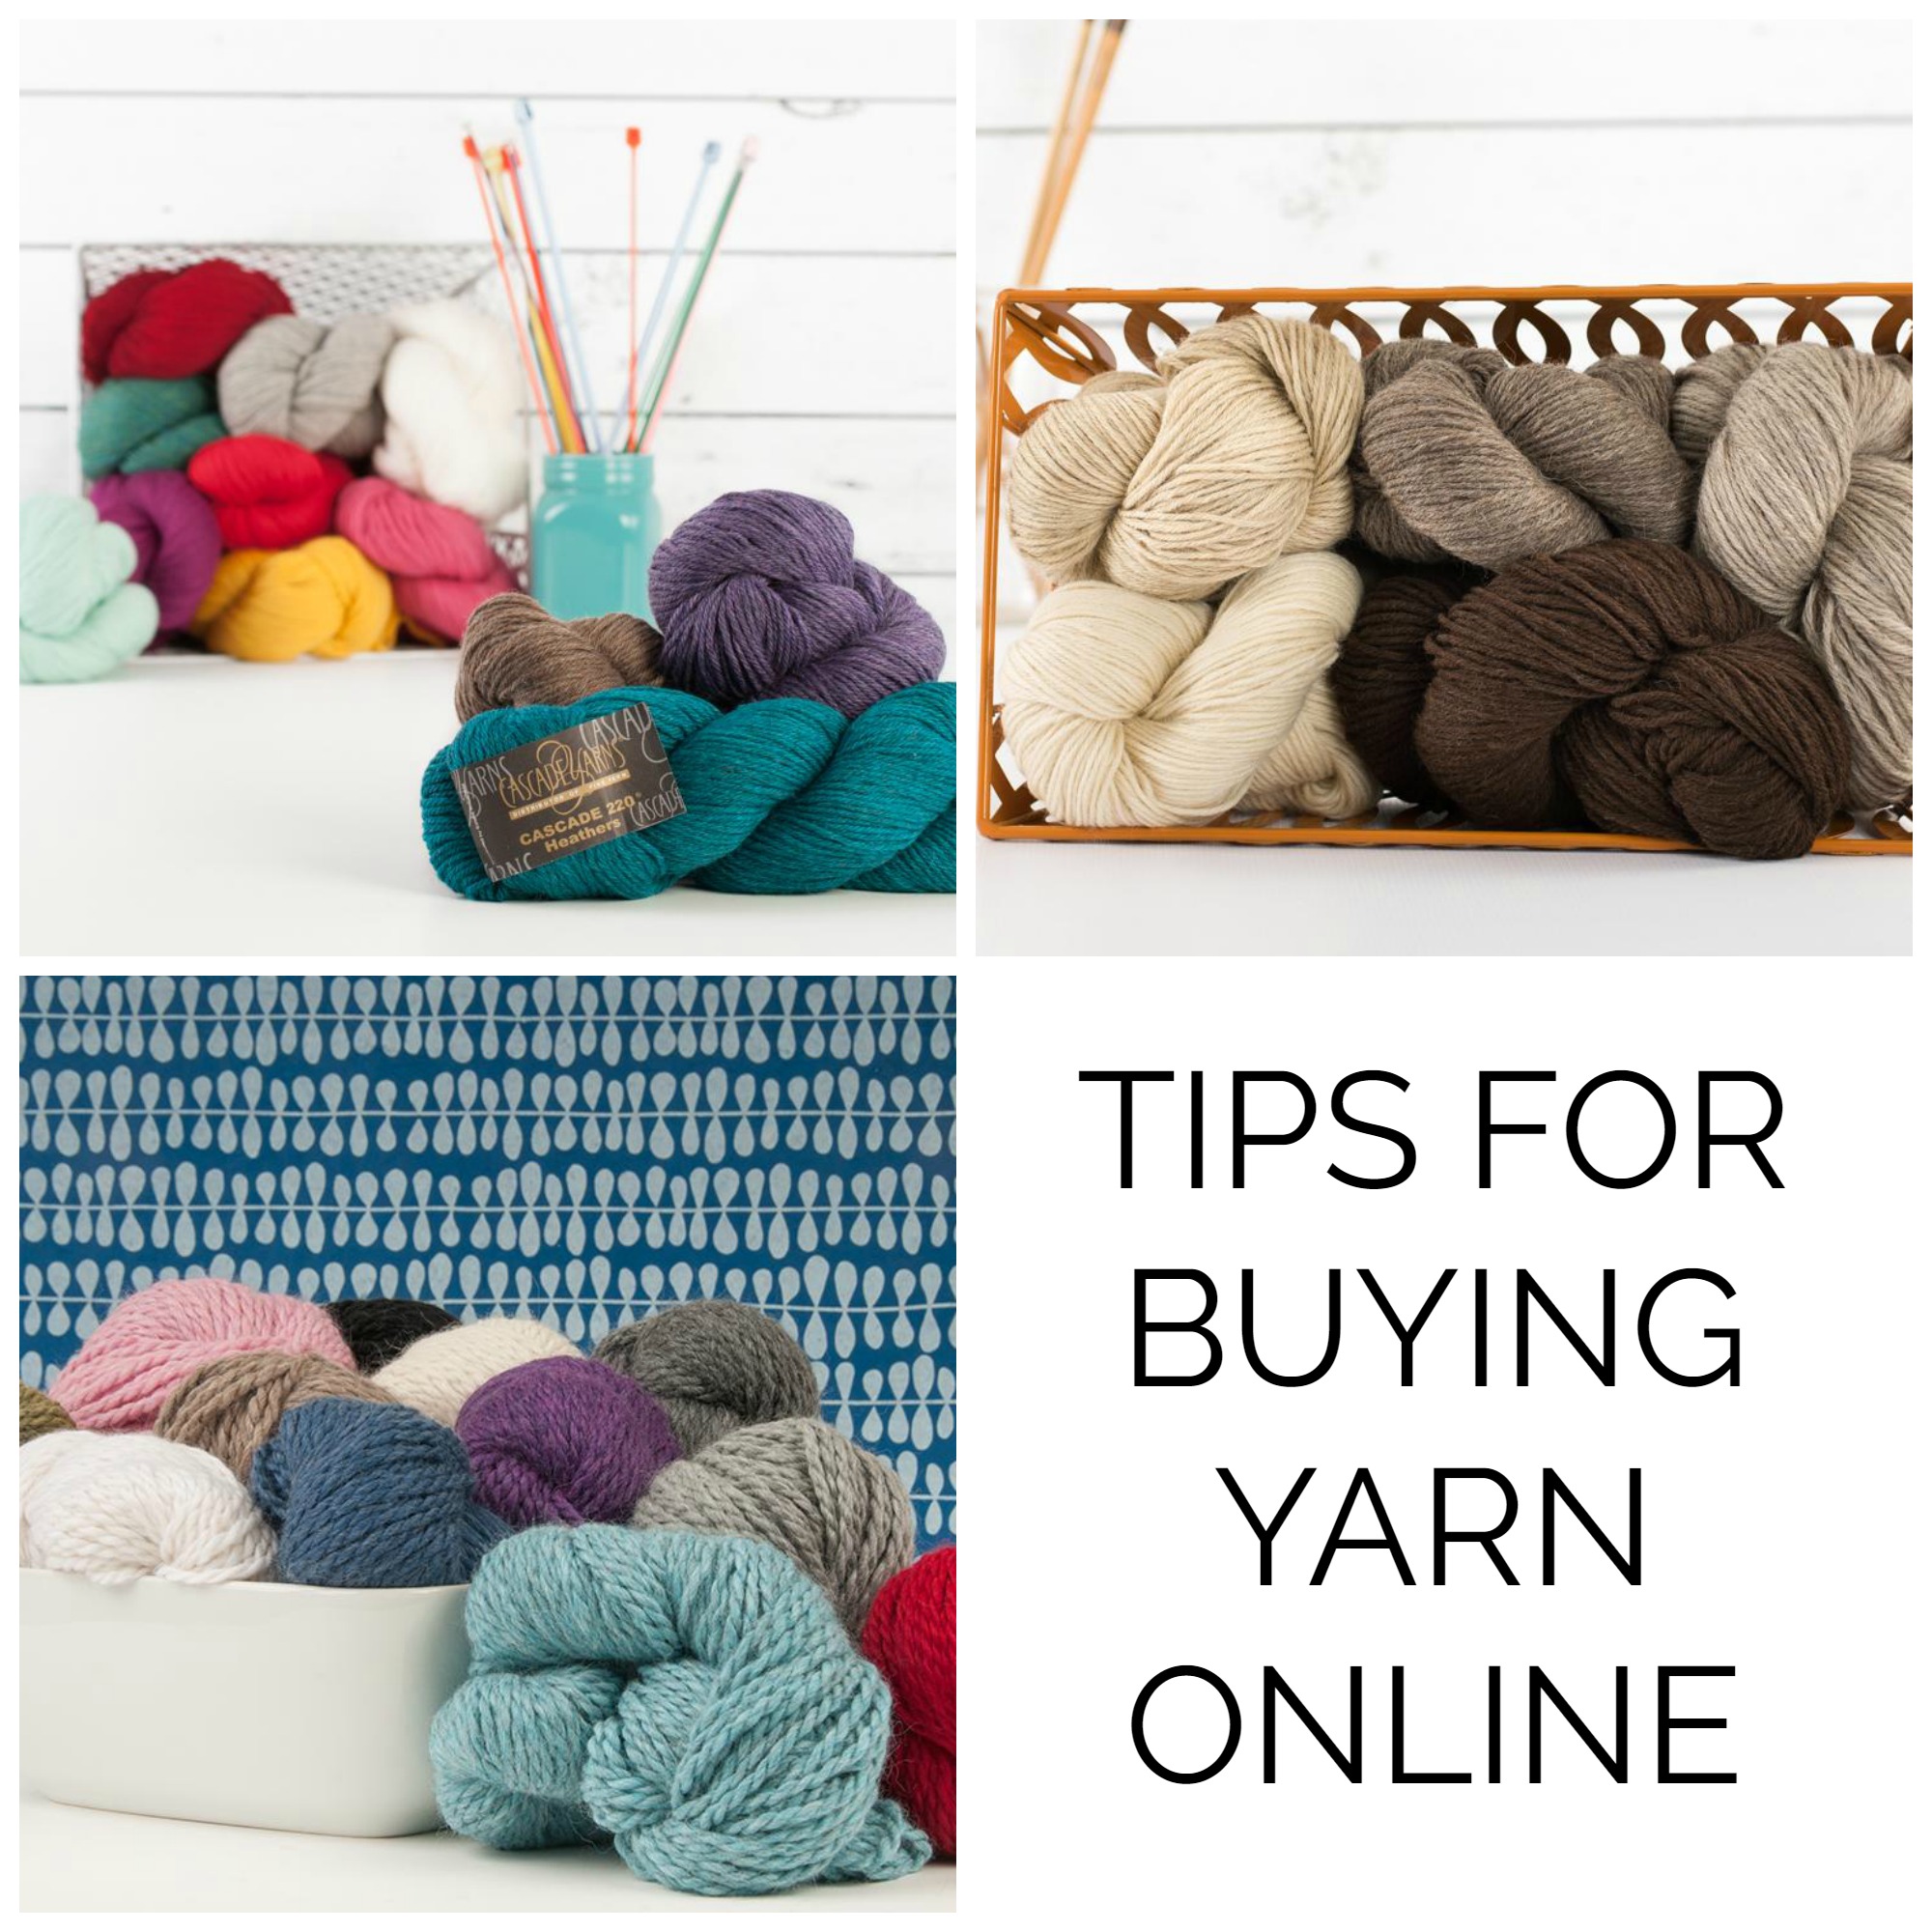 How to Buy Yarn Online: 8 Great Tips